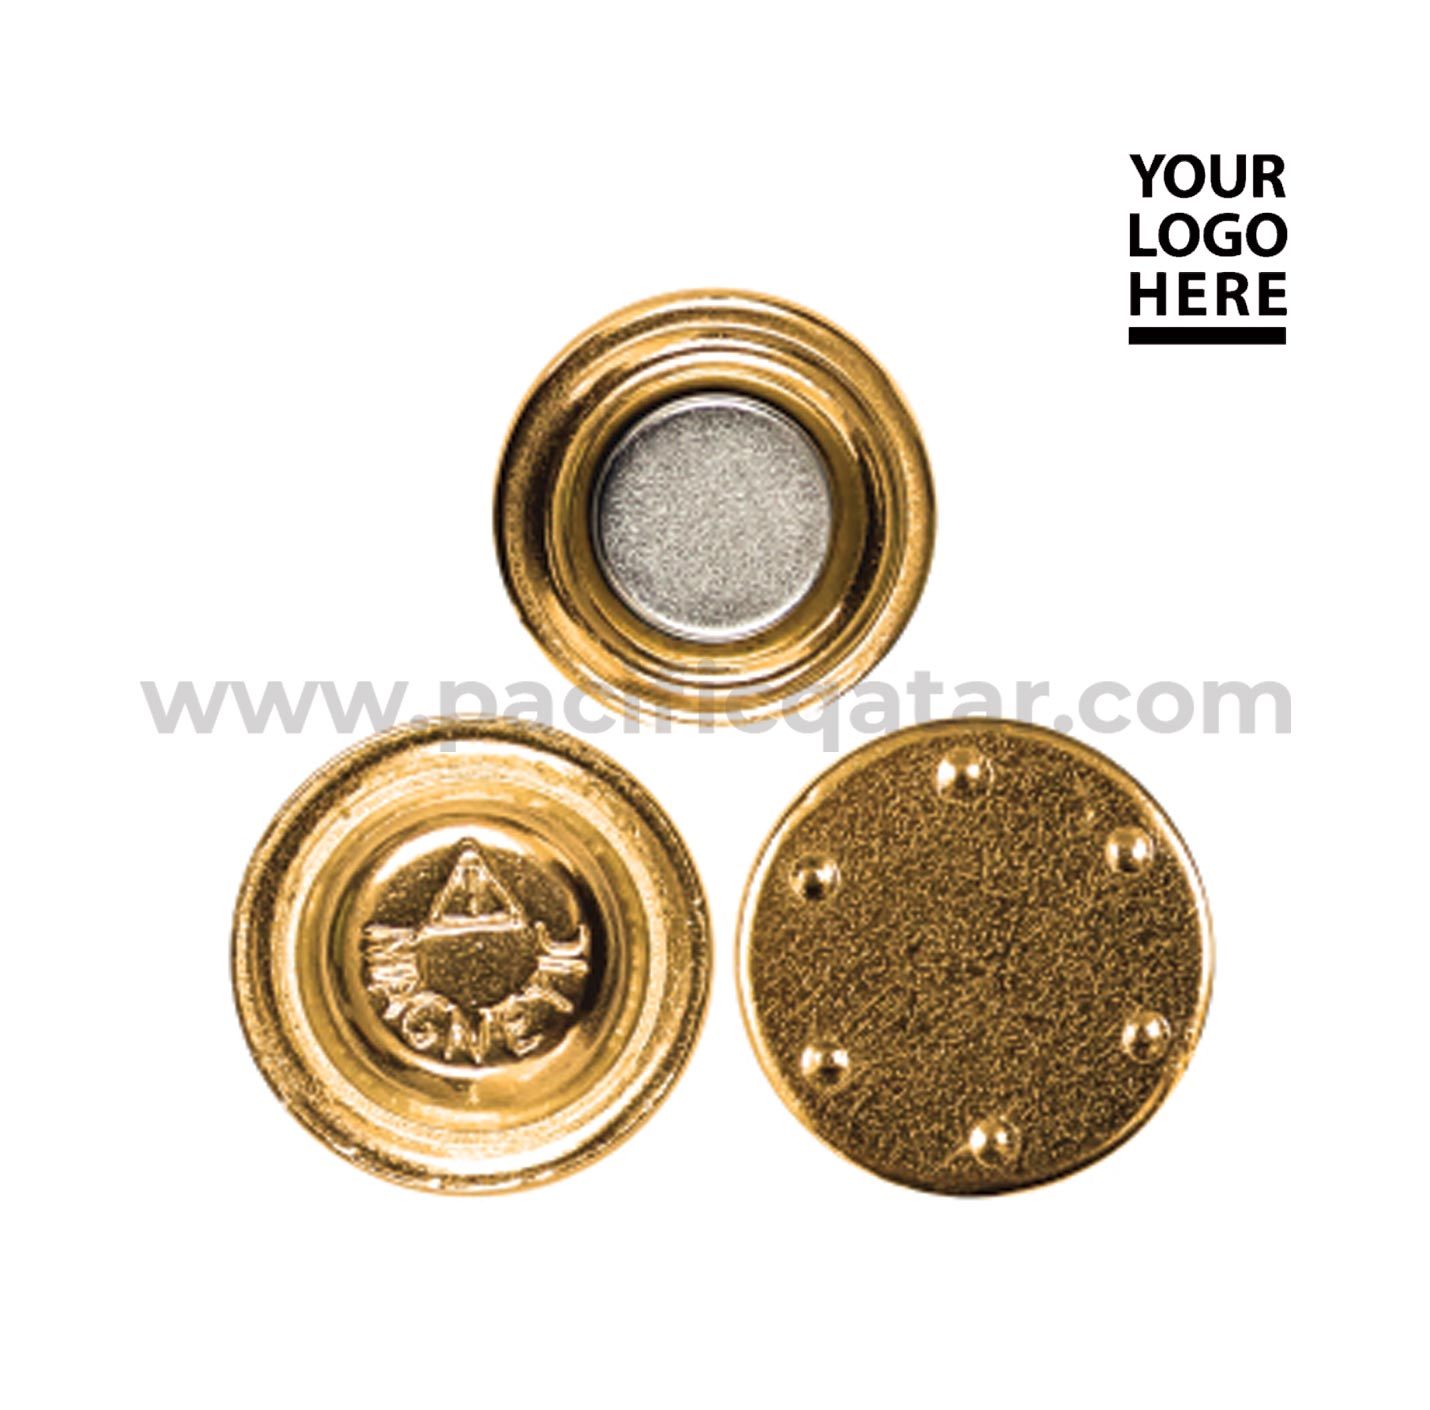 Gold Plated Round Magnets for badges